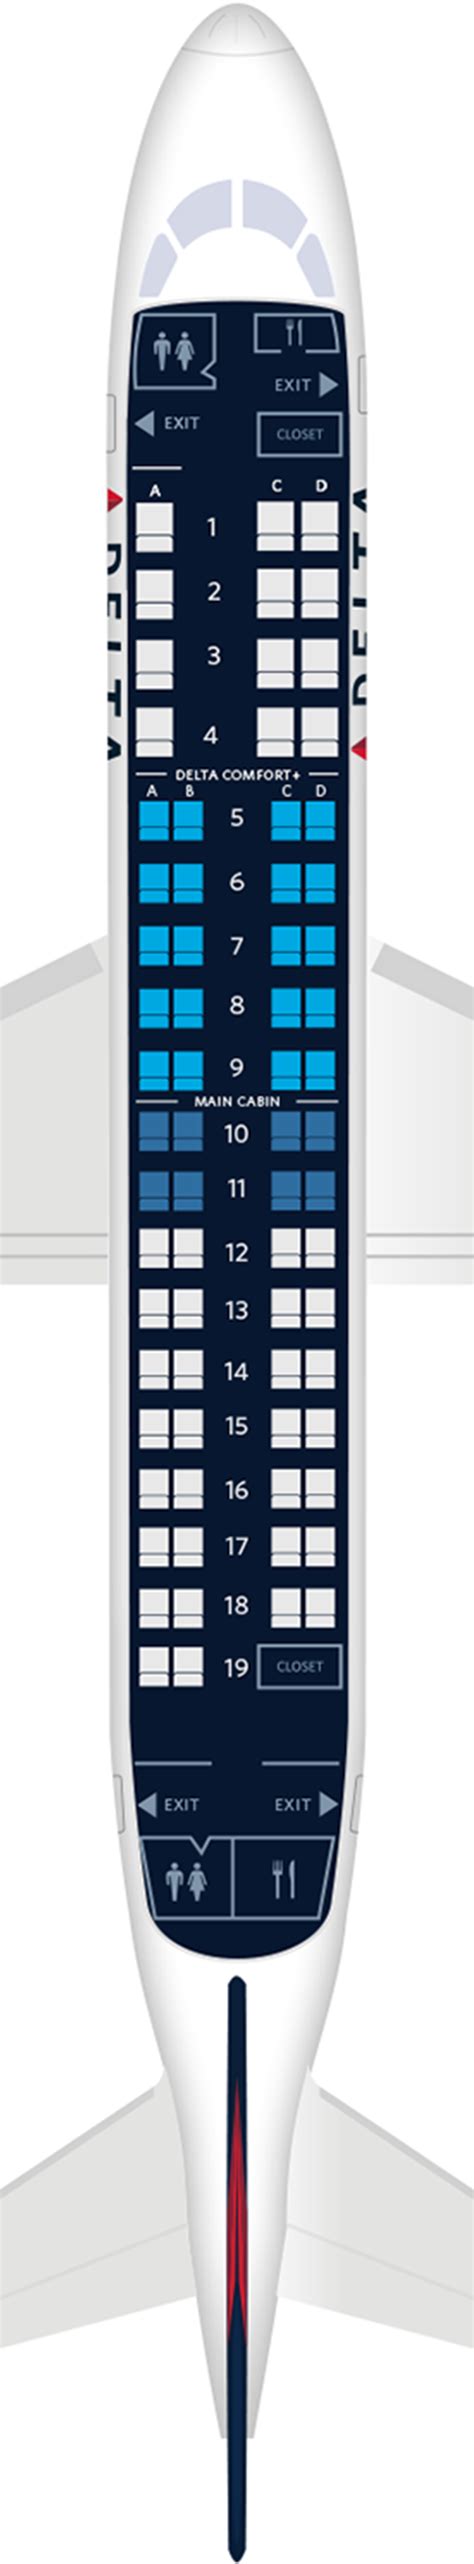 Embraer e 175 seating chart. Airlines operating Embraer E195 (E195) planes. The Embraer E195 is a narrow-body, twin-engine regional jet developed and manufactured by Embraer, a Brazilian aerospace company. It has a capacity of up to 132 passengers and a range of up to 2,400 nautical miles (4,448 kilometers). It is powered by two GE CF34-10E engines. 